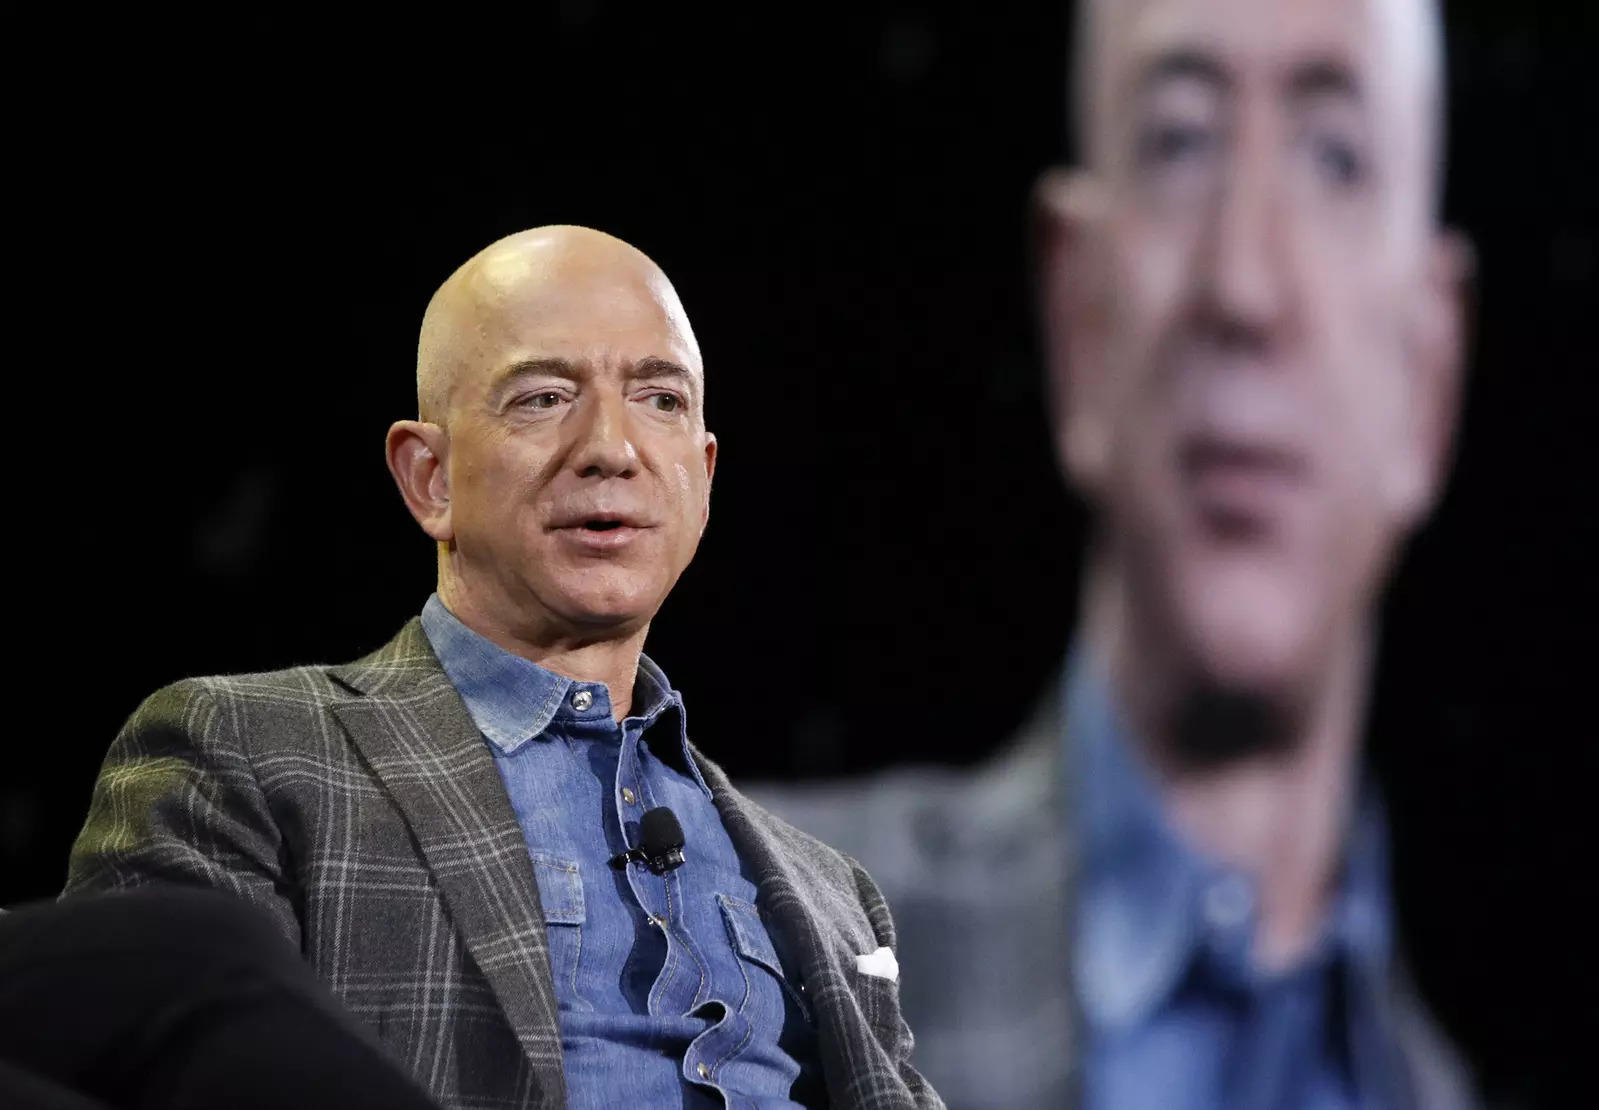 Jeff Bezos to step down as Amazon CEO, turning over reins to firm's cloud-computing boss Andy Jassy